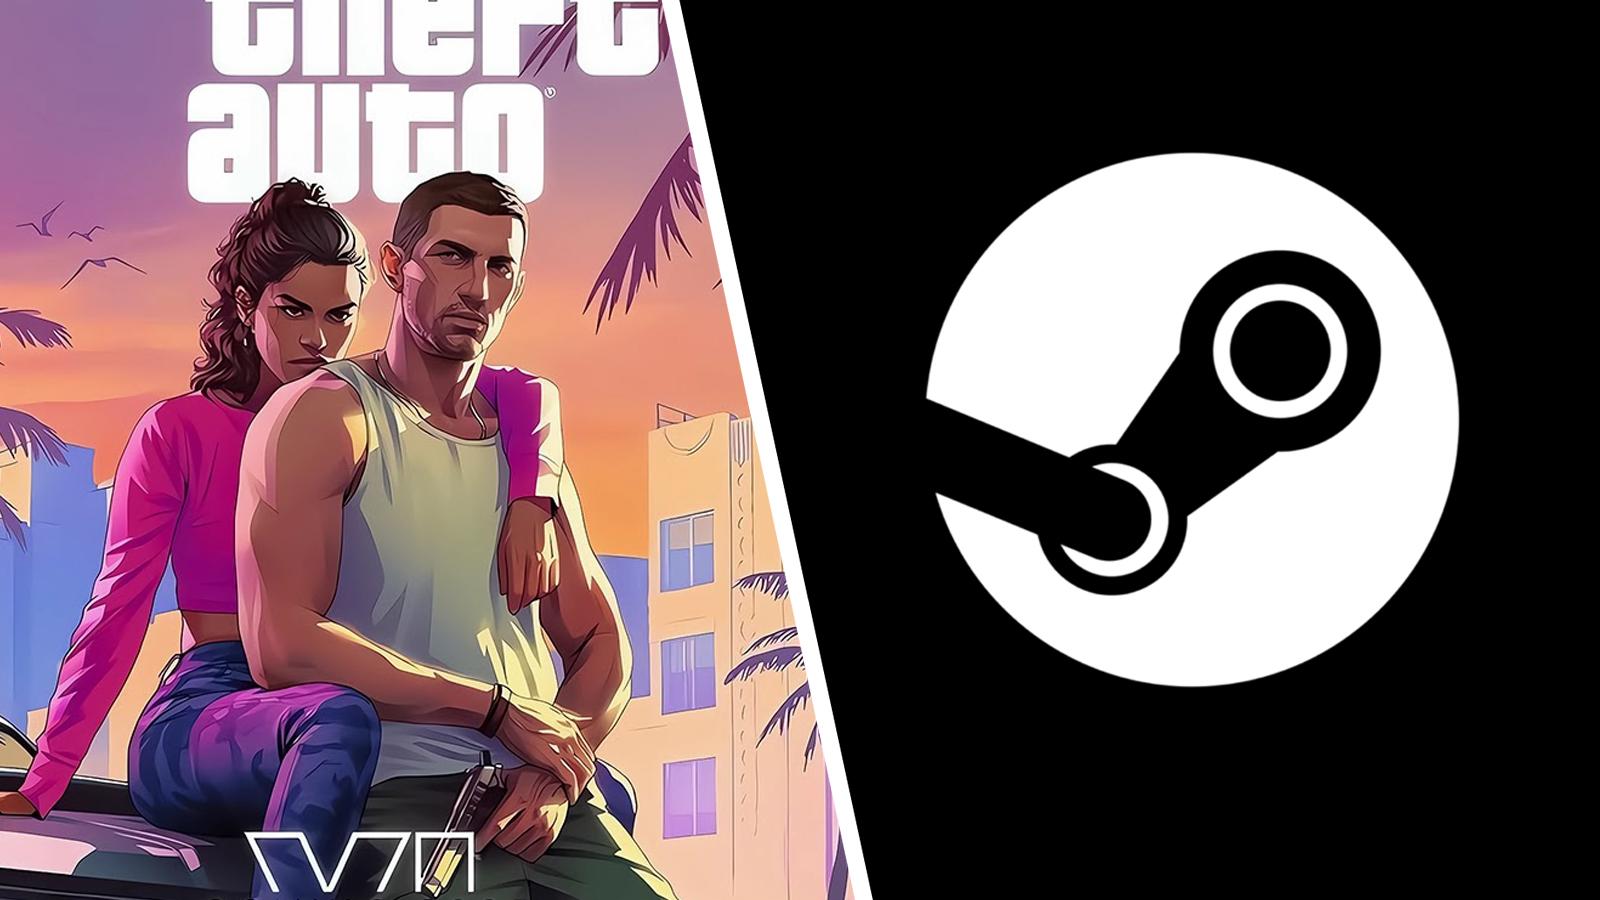 GTA 6 to launch on Xbox Series SX and PlayStation 5 first; no PC release  date confirmed -  News